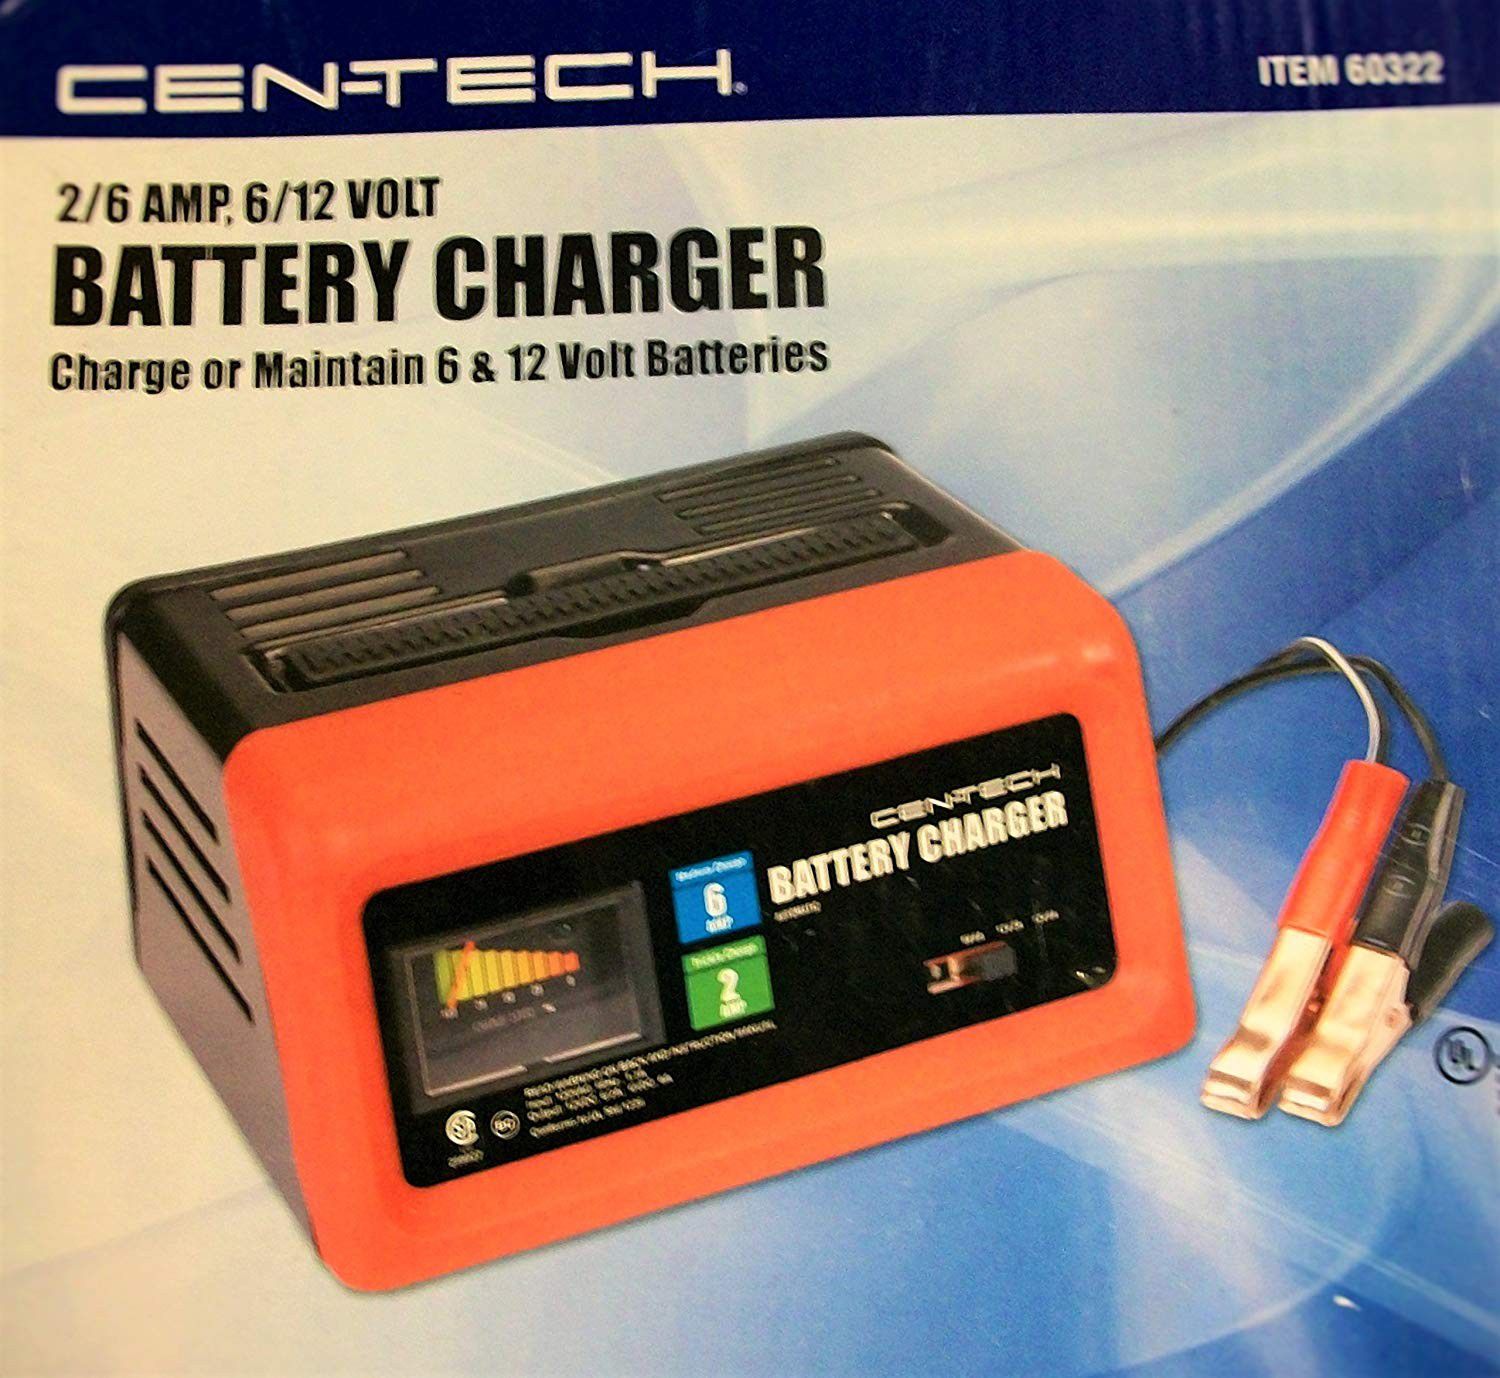 Cen-Tech Manual Charger 6/12V 2/6 Amp 6-1/2 ft. Long Battery Cables  Self-resetting 120V 60322 for Sale in Tumwater, WA - OfferUp